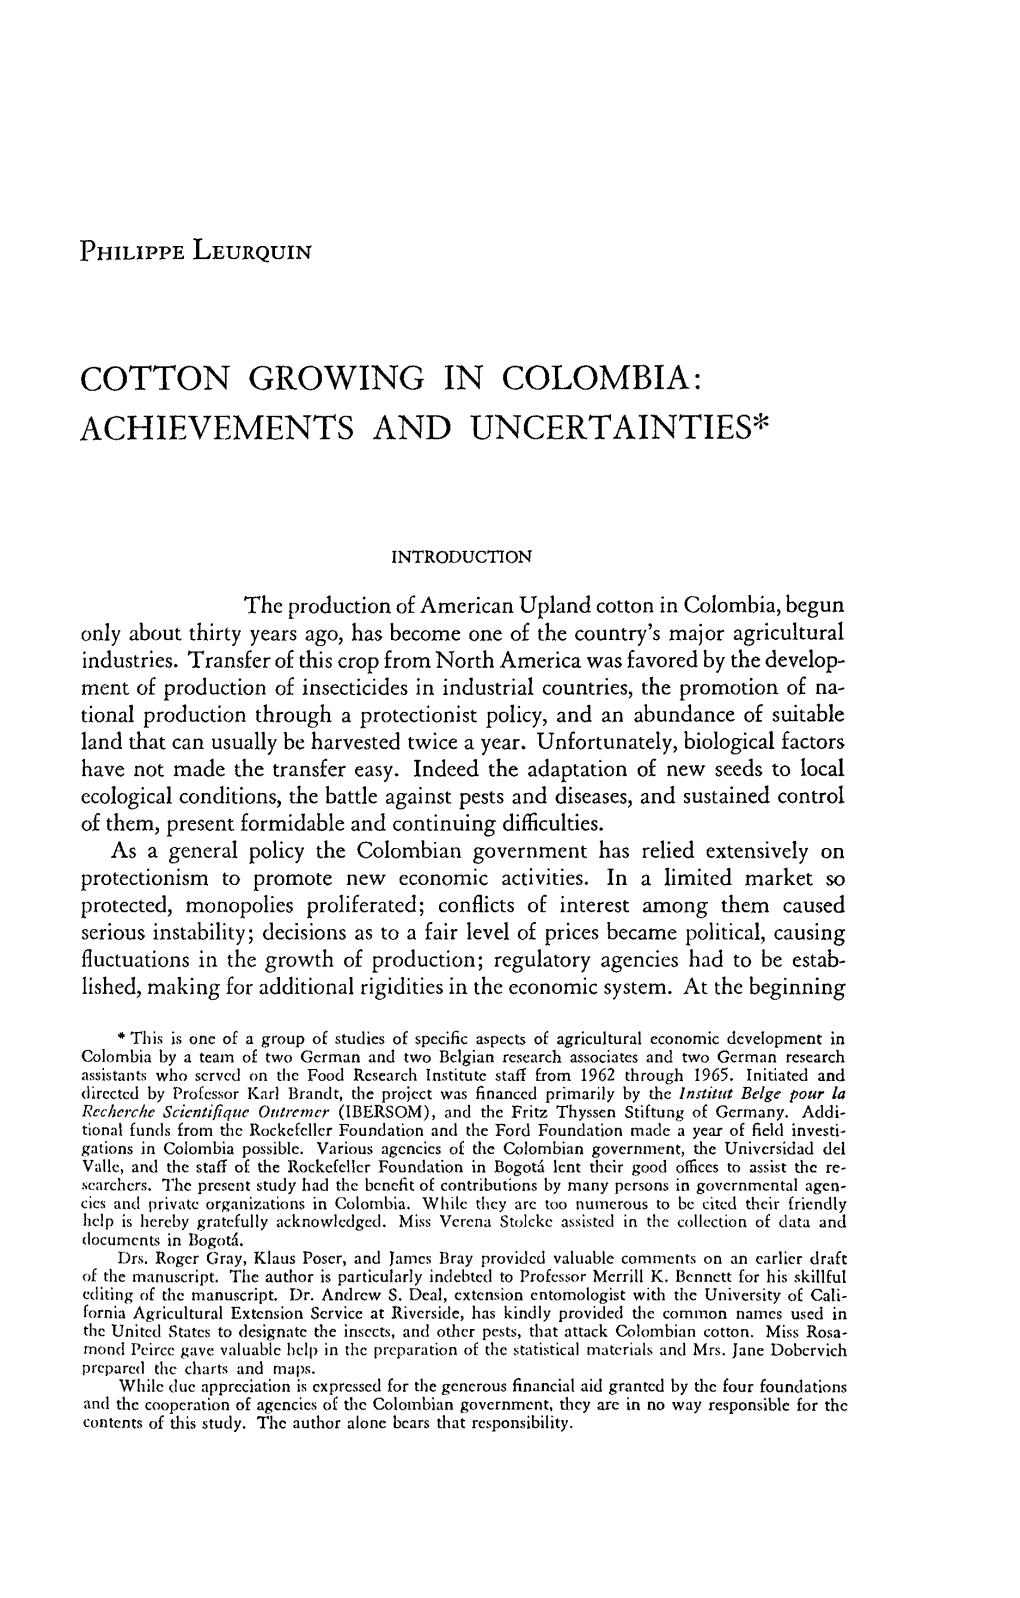 Cotton Growing in Colombia: Achievements and Uncertainties*